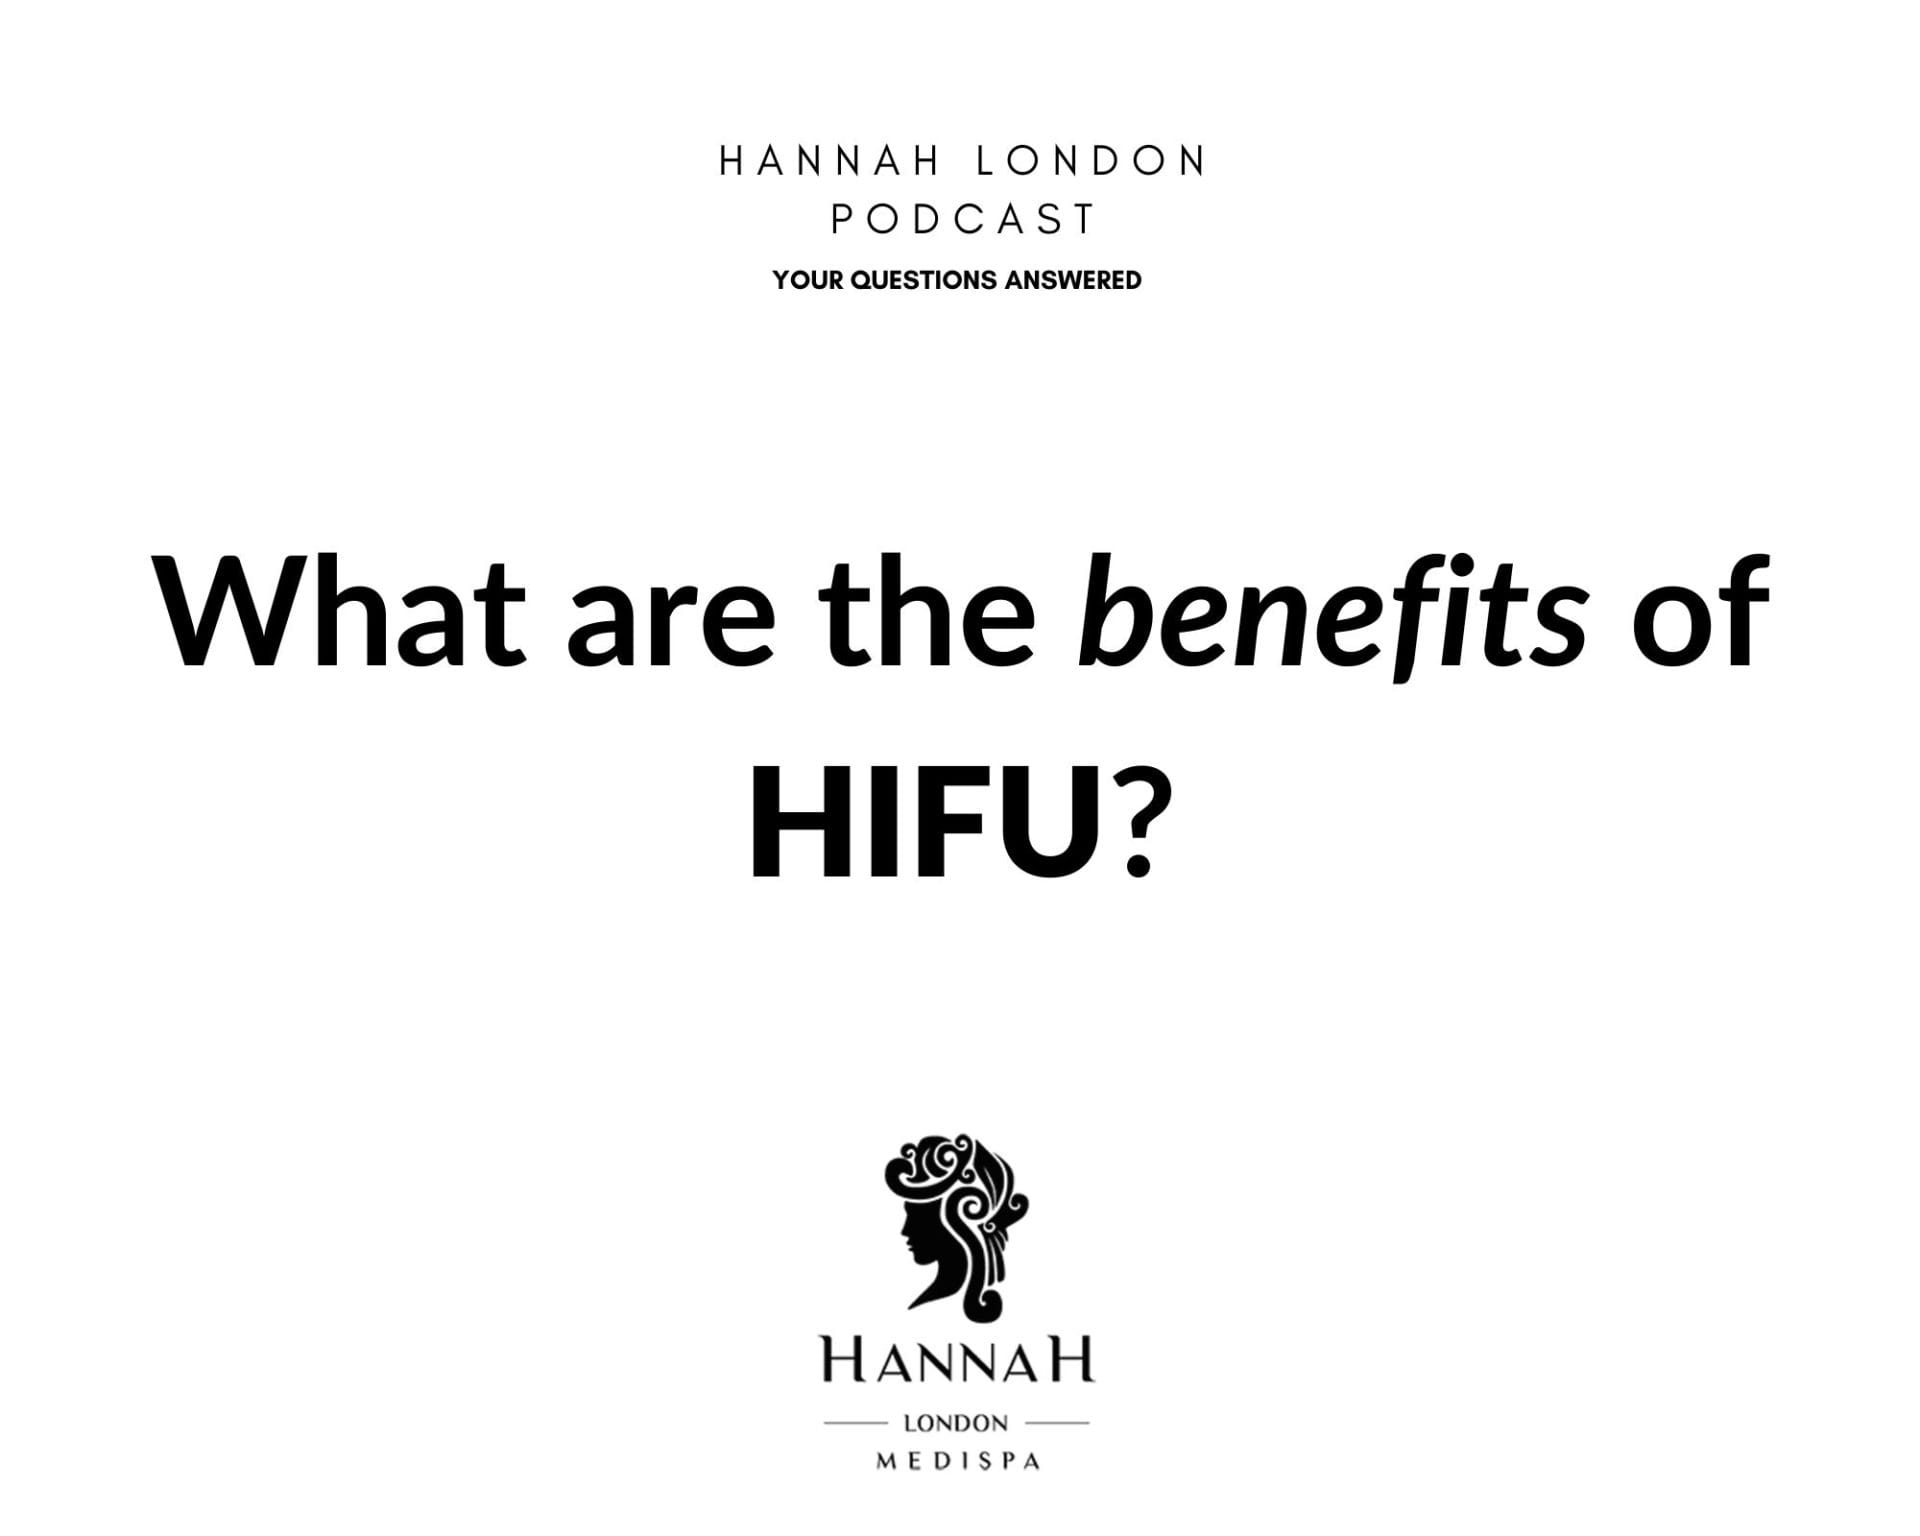 What are the benefits of HIFU?